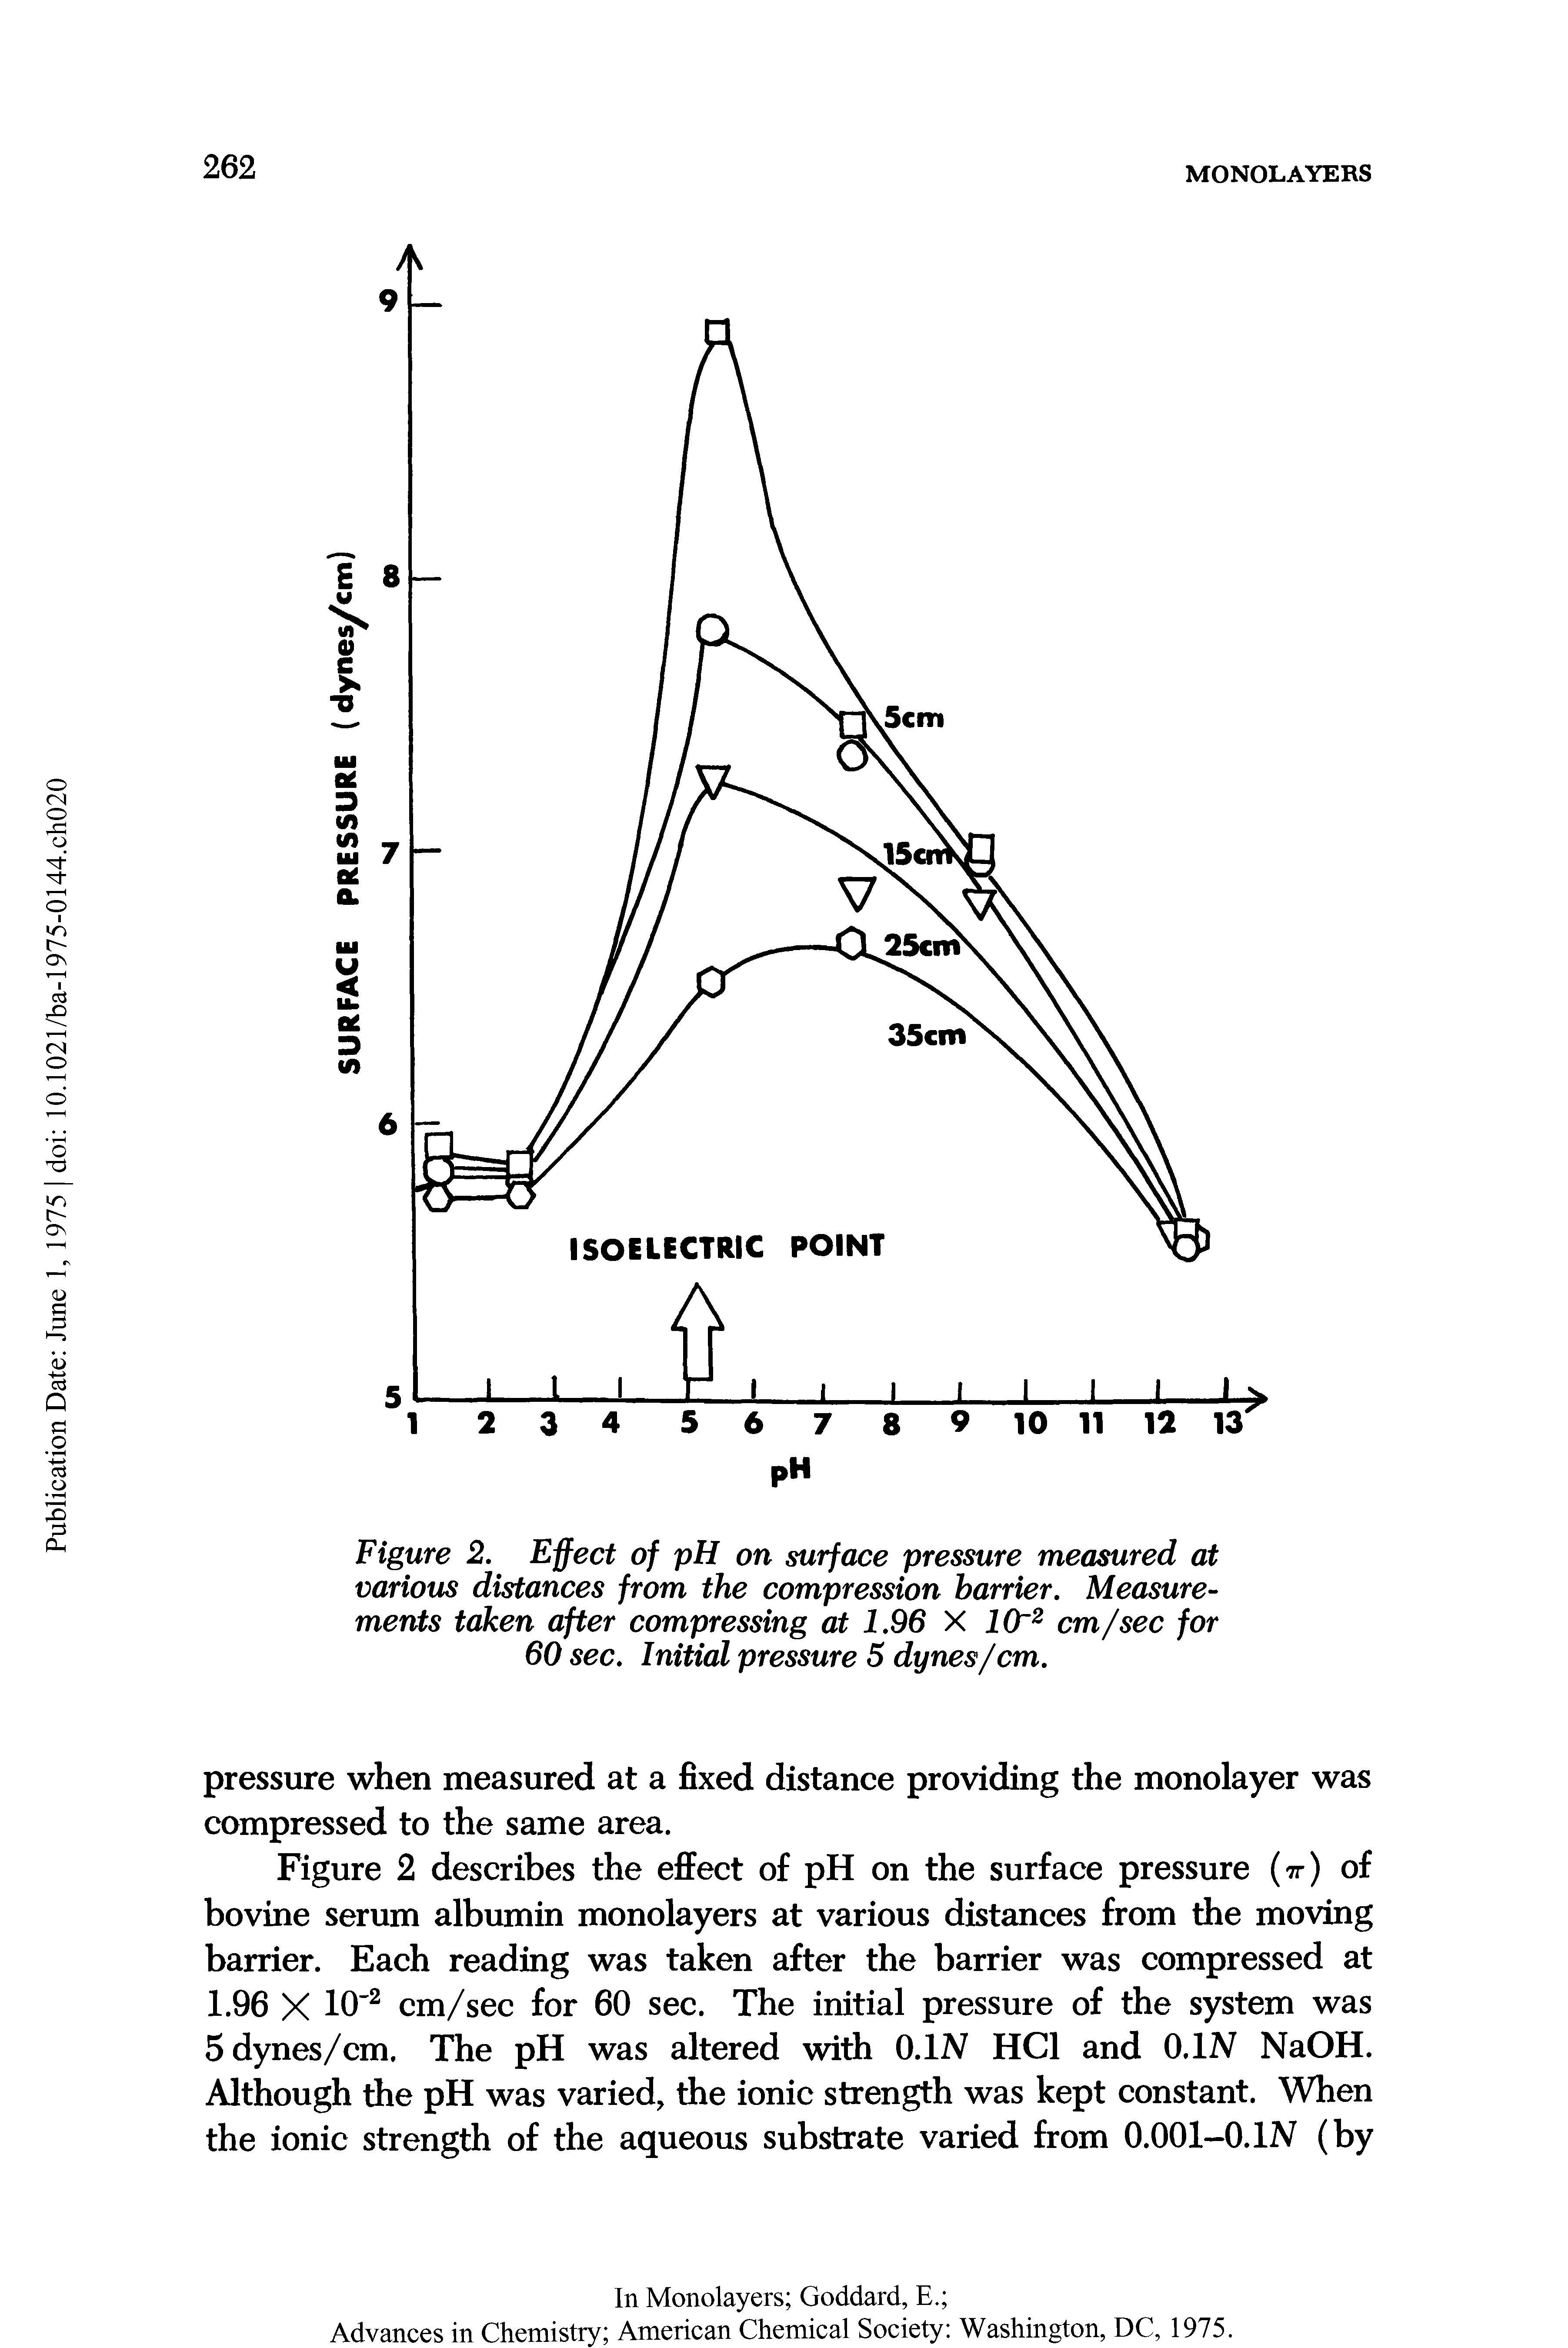 Figure 2. Effect of pH on surface pressure measured at various distances from the compression barrier. Measurements taken after compressing at 1.96 X 10 2 cm/sec for 60 sec. Initial pressure 5 dynes/cm.